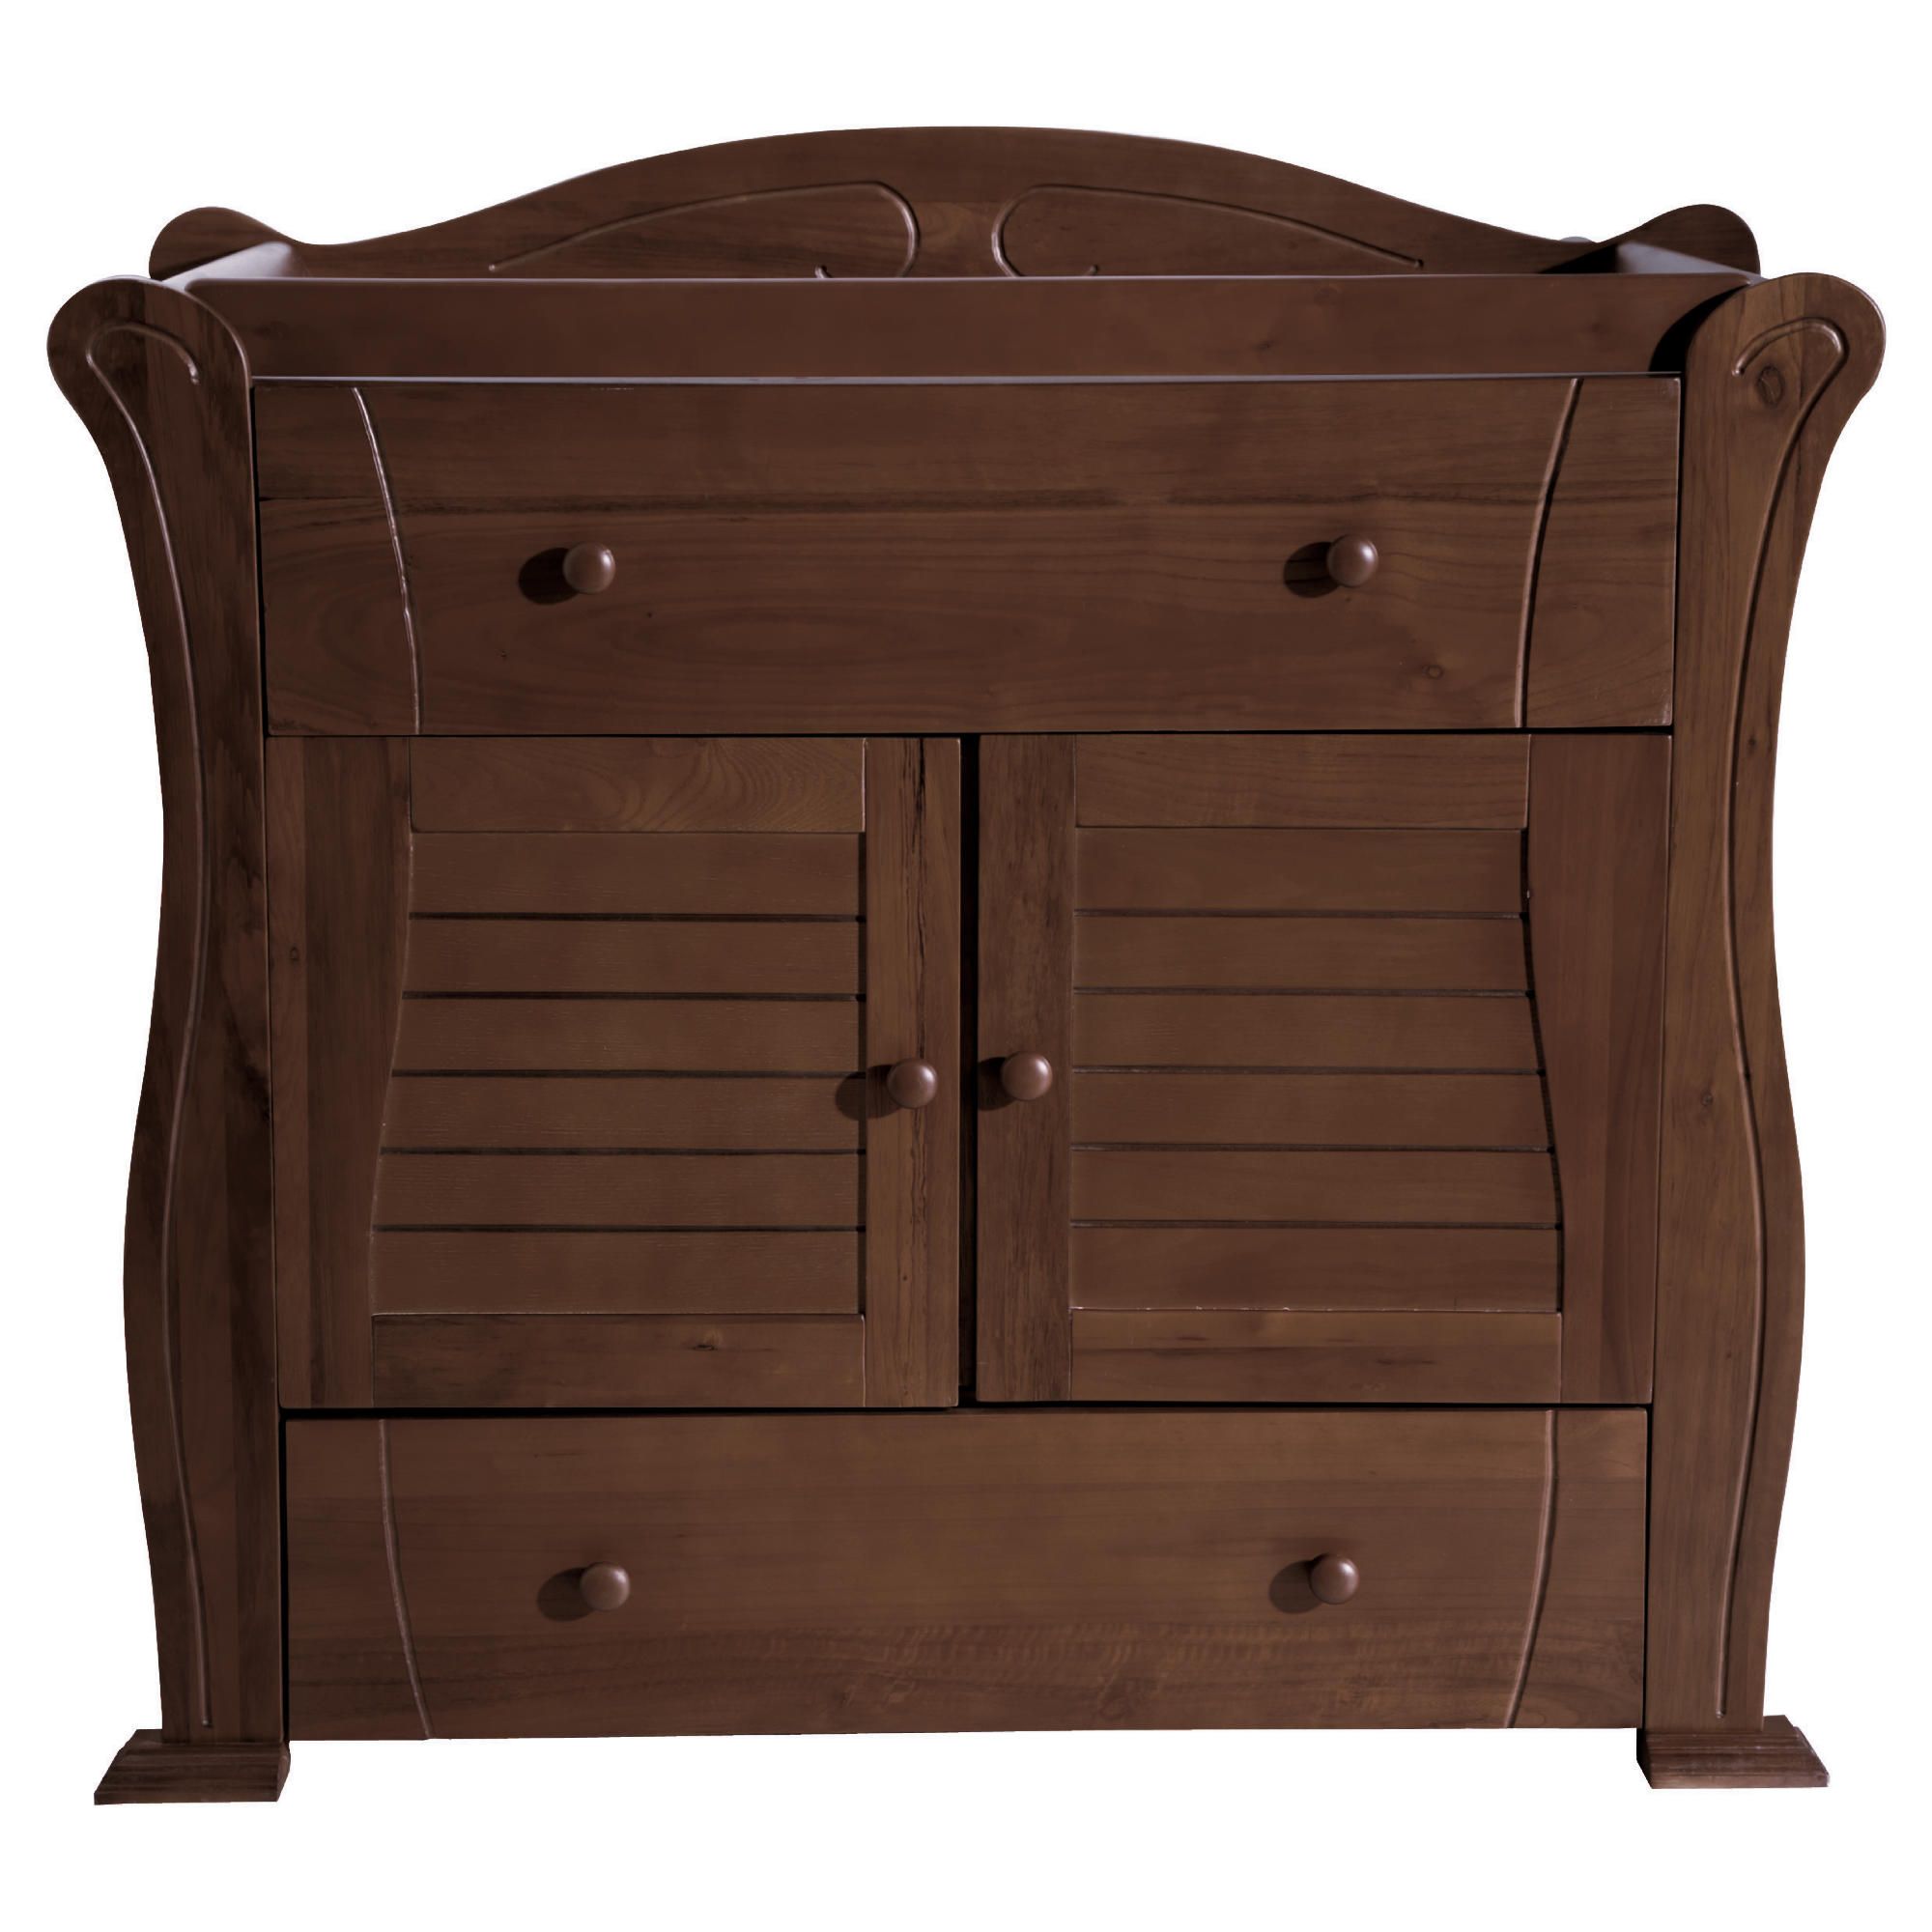 Tutti Bambini Marie Chest Of Drawers, Walnut at Tesco Direct